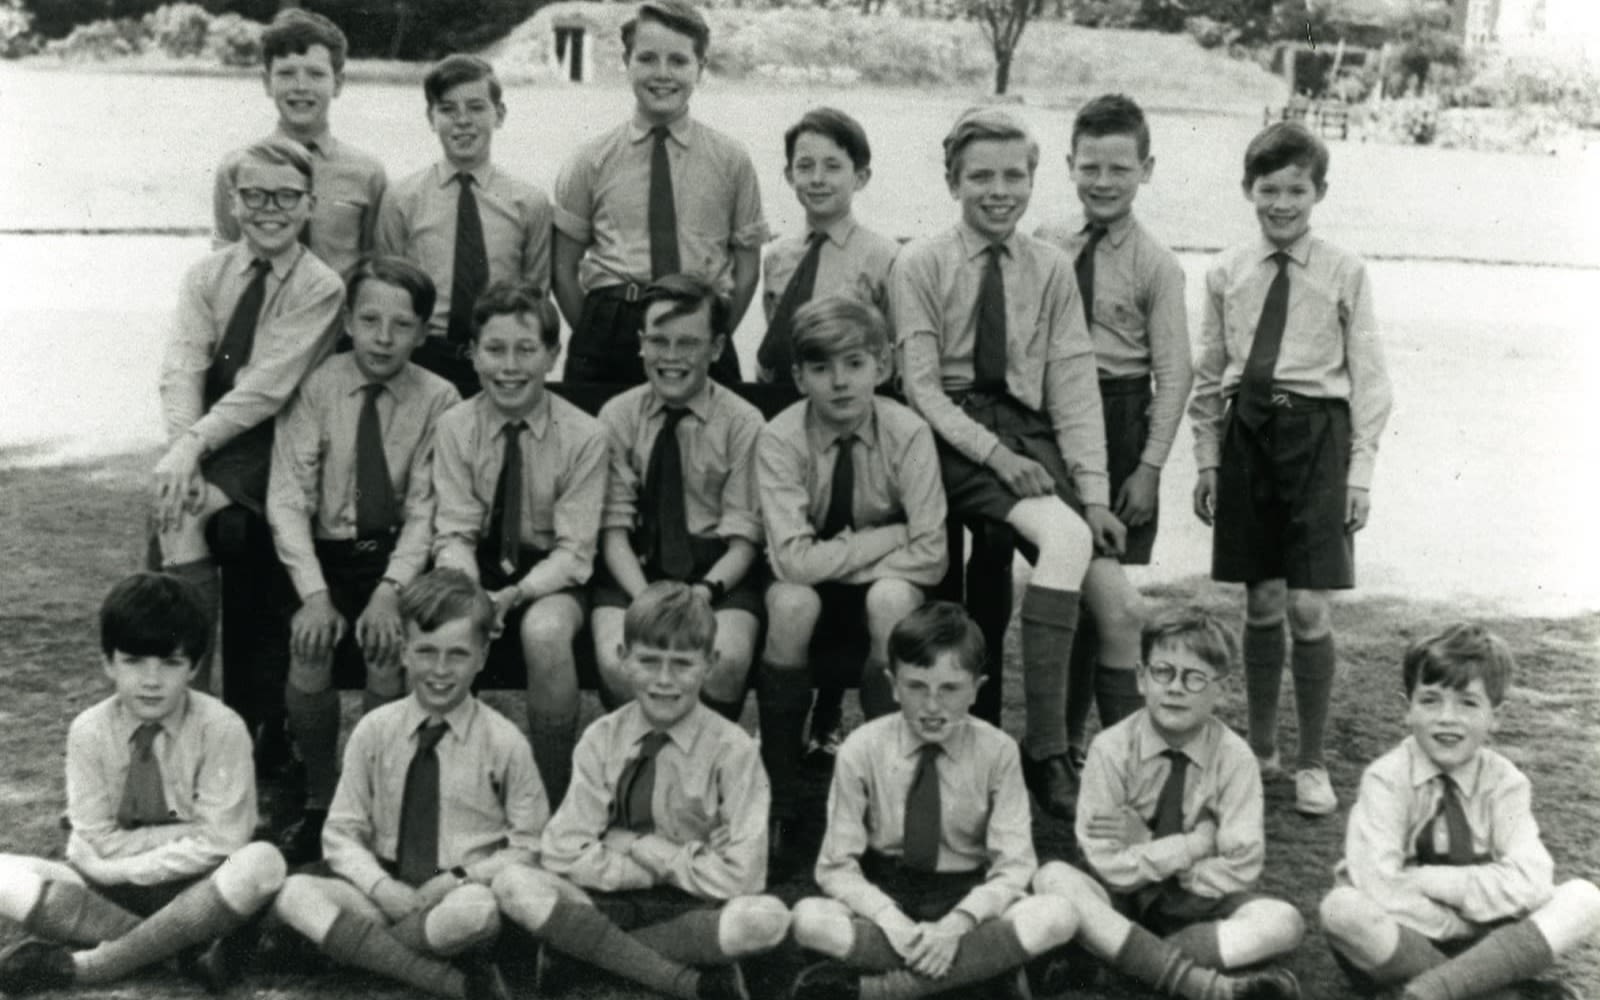 Young Richard Branson at school wit his class mates